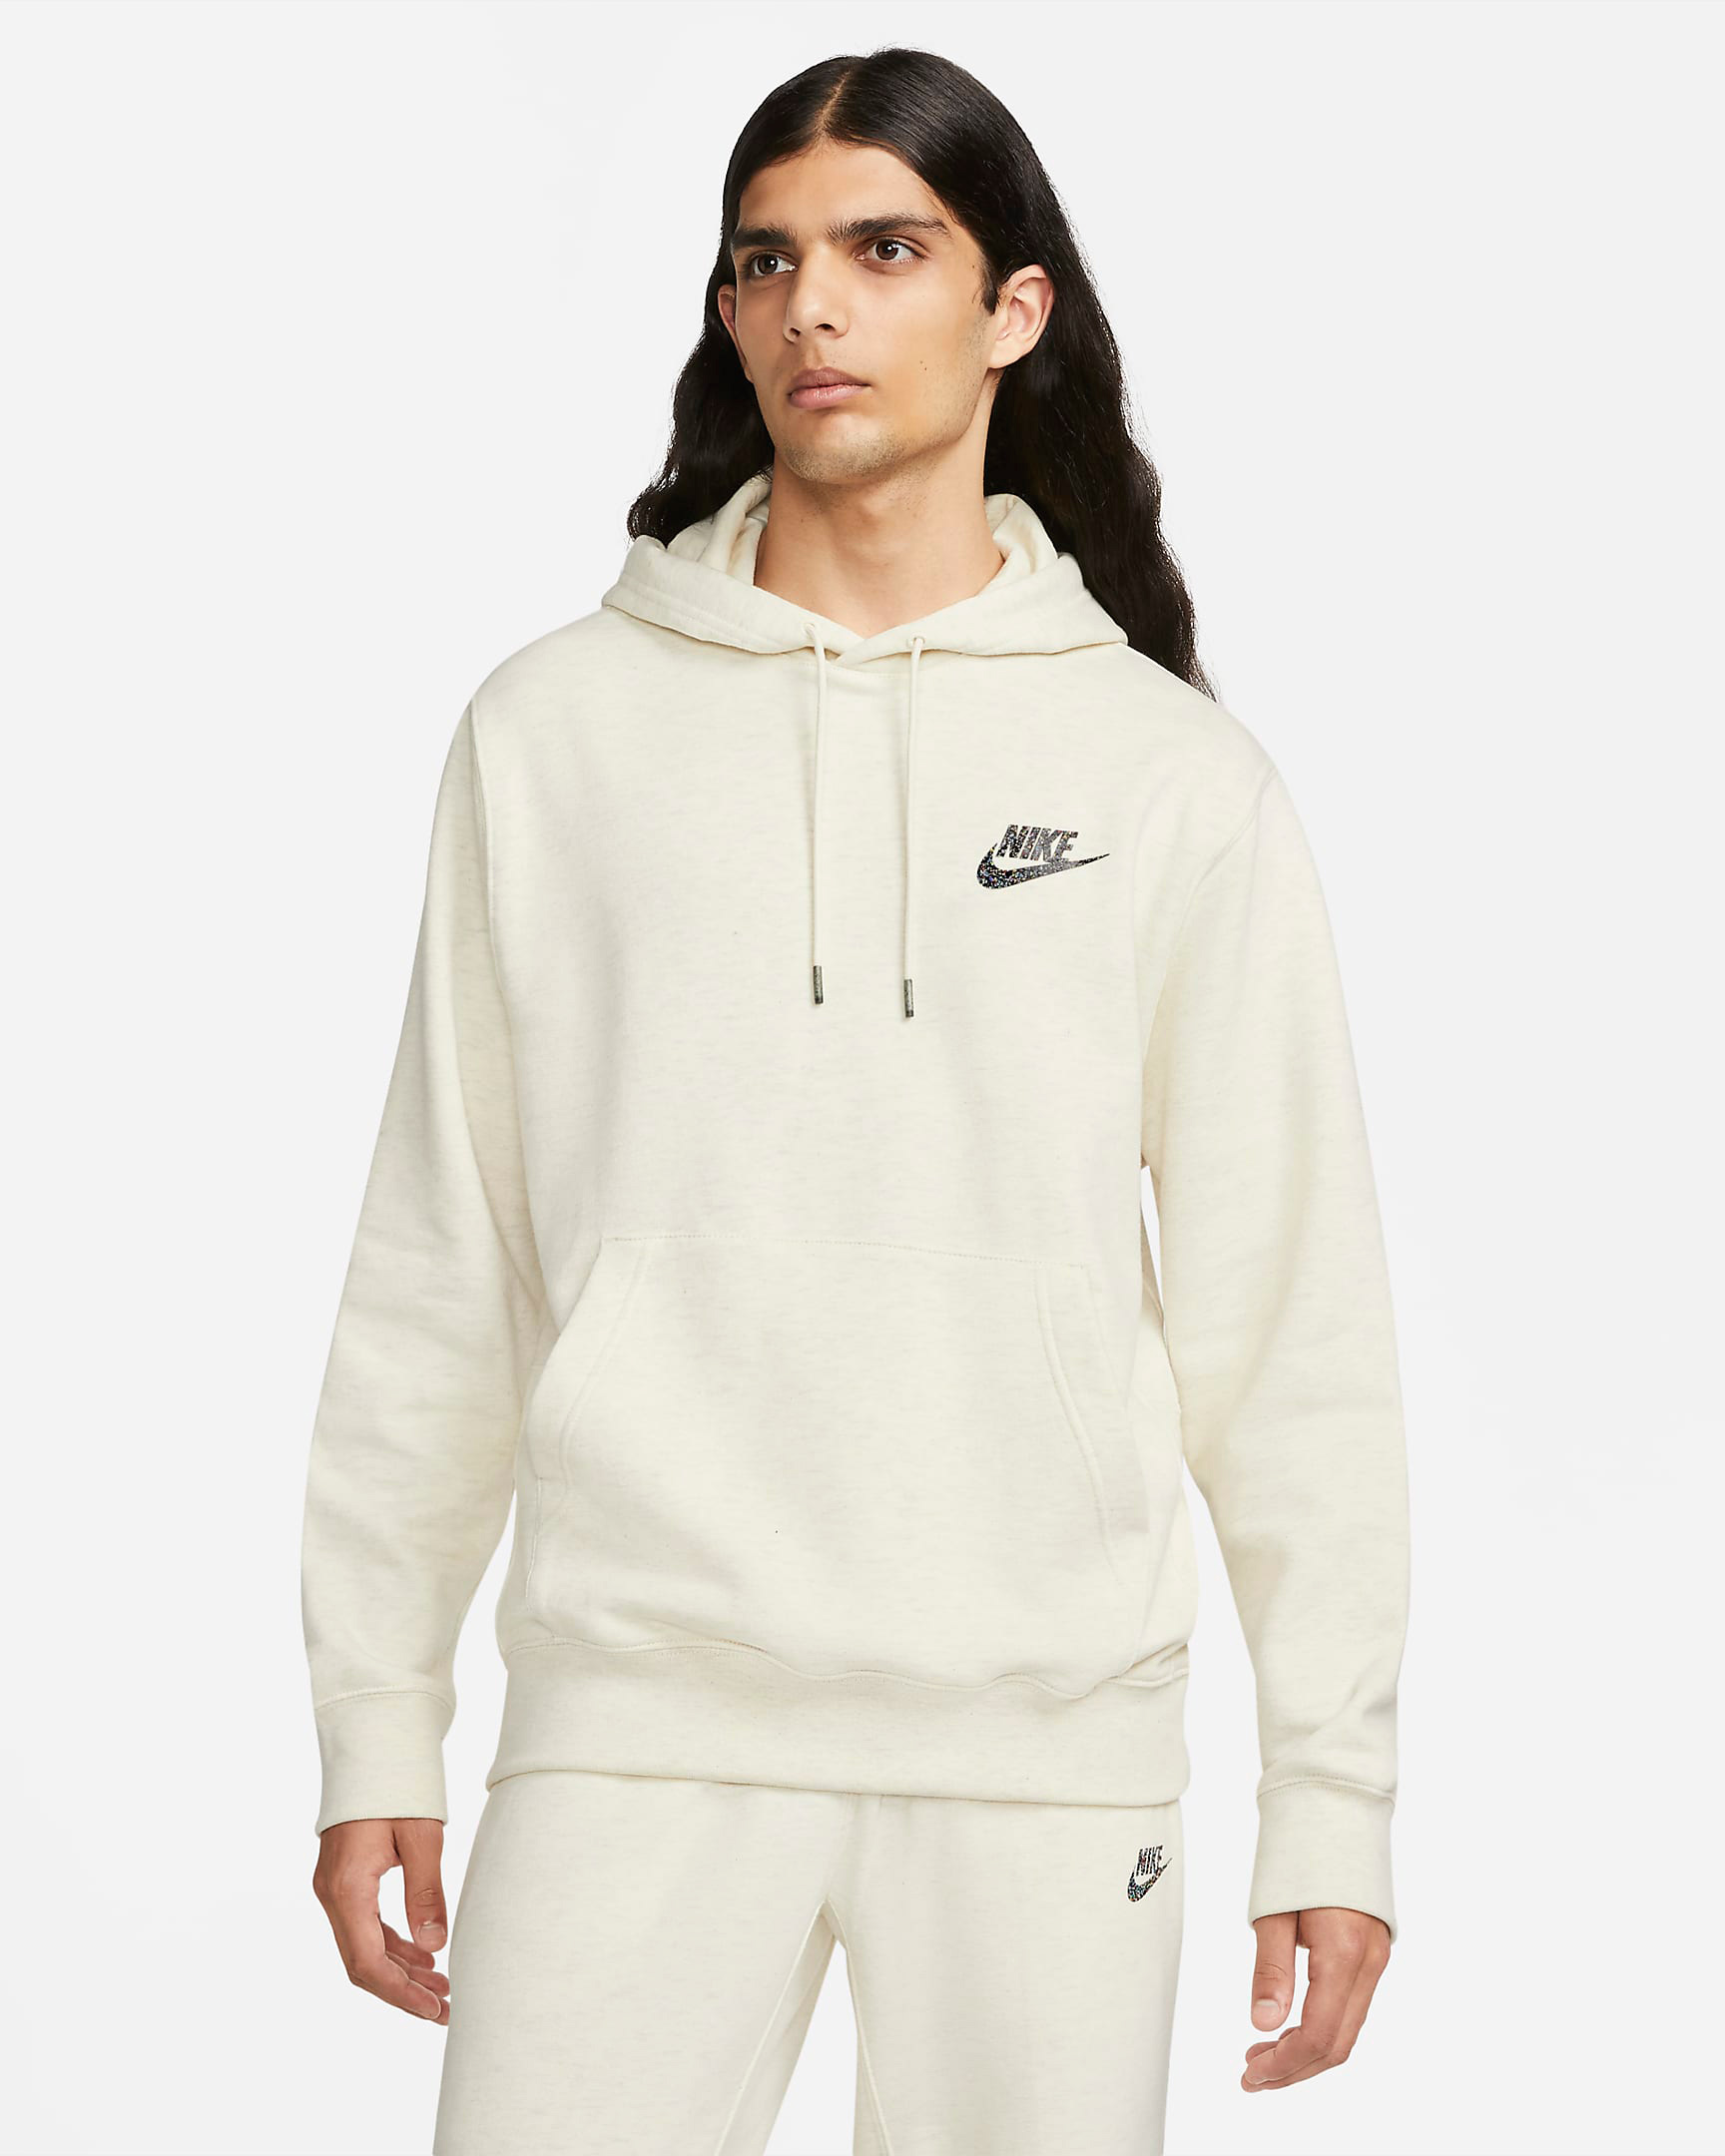 Nike Coconut Milk Sneaker Clothing Shirts Outfits